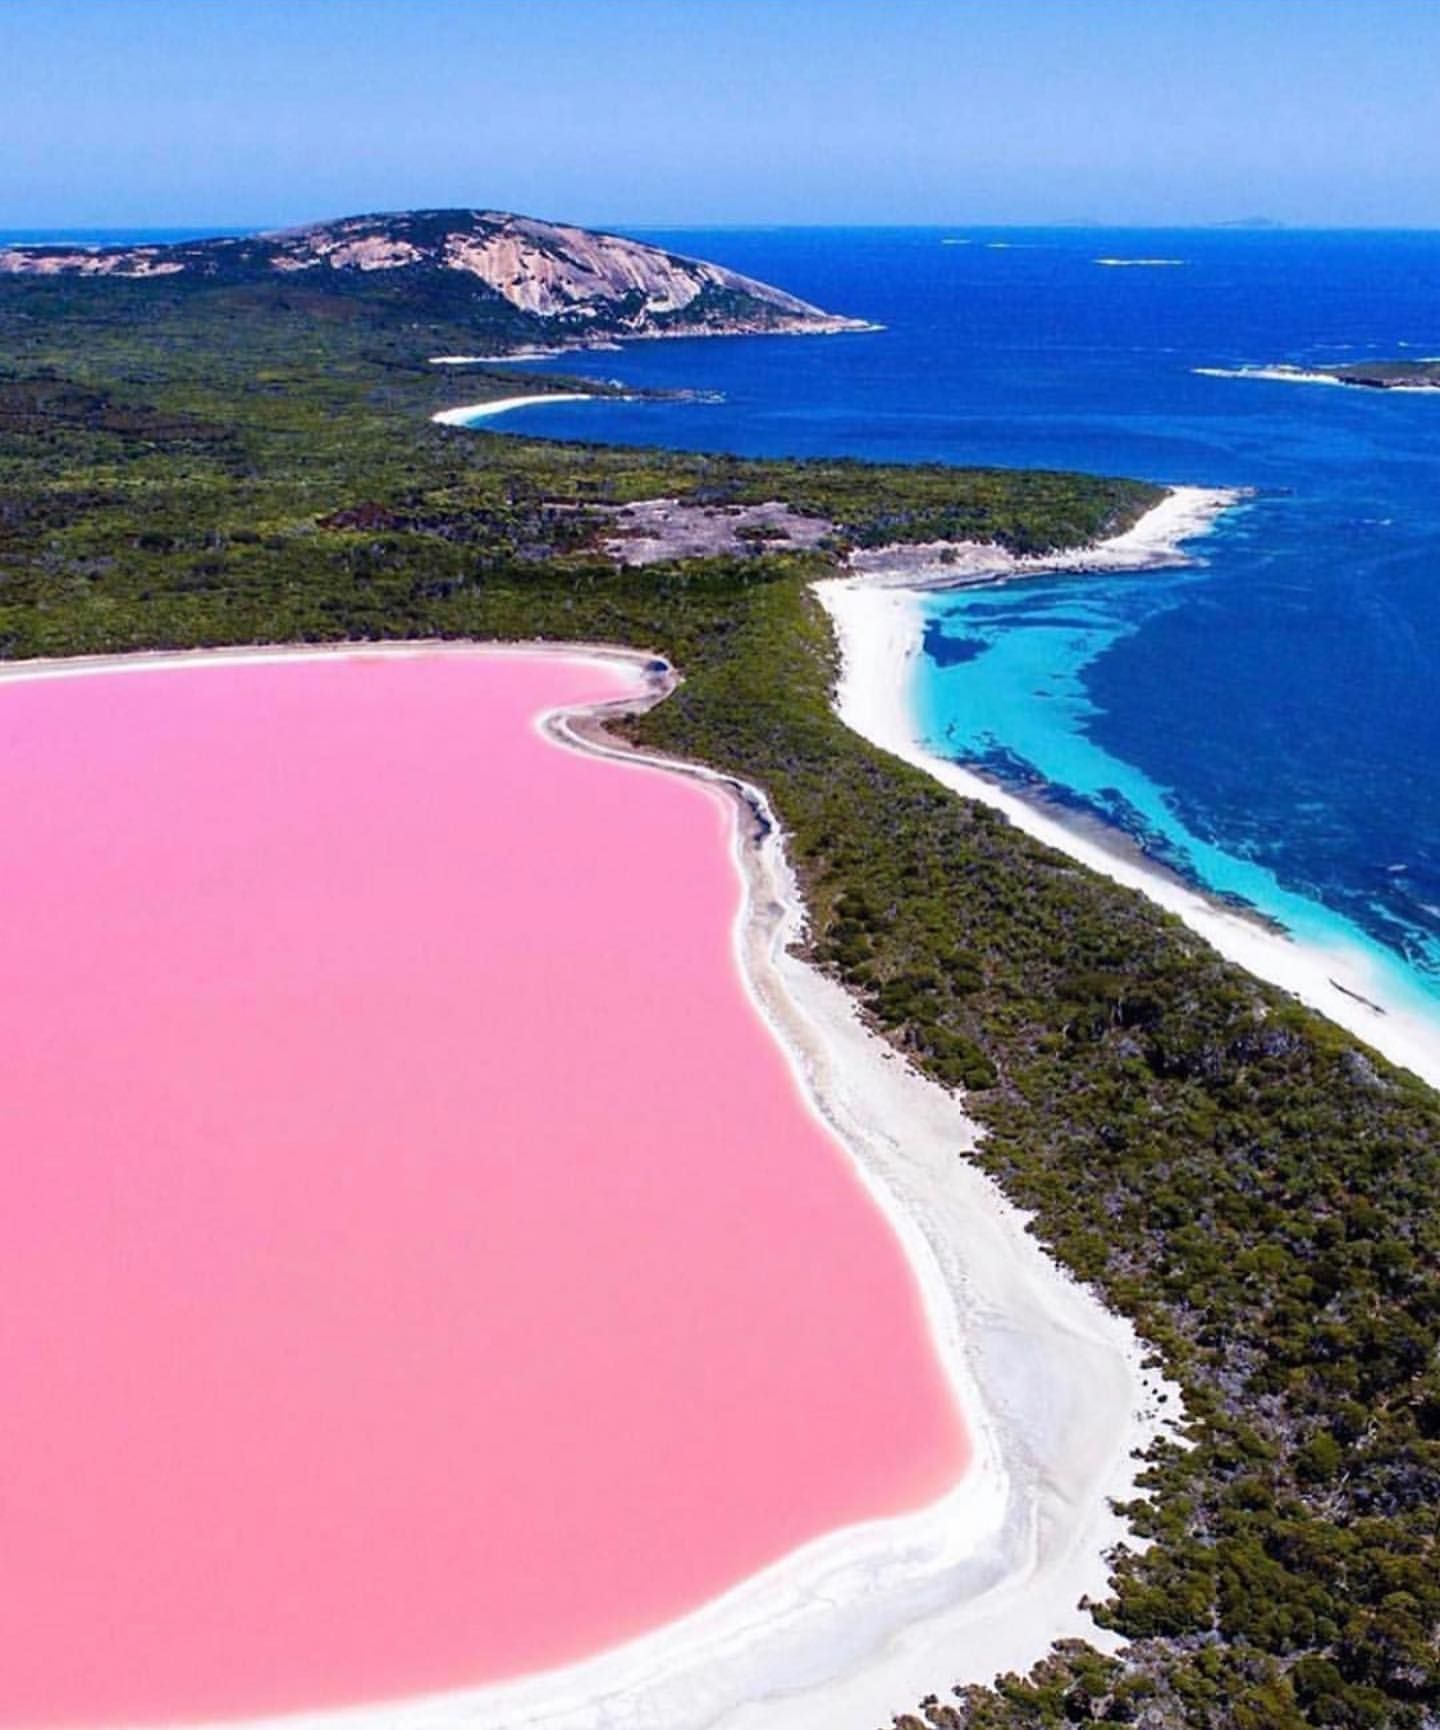 best Lake Hillier image on Pholder. Pics, Earth Porn and Interestingasf*ck